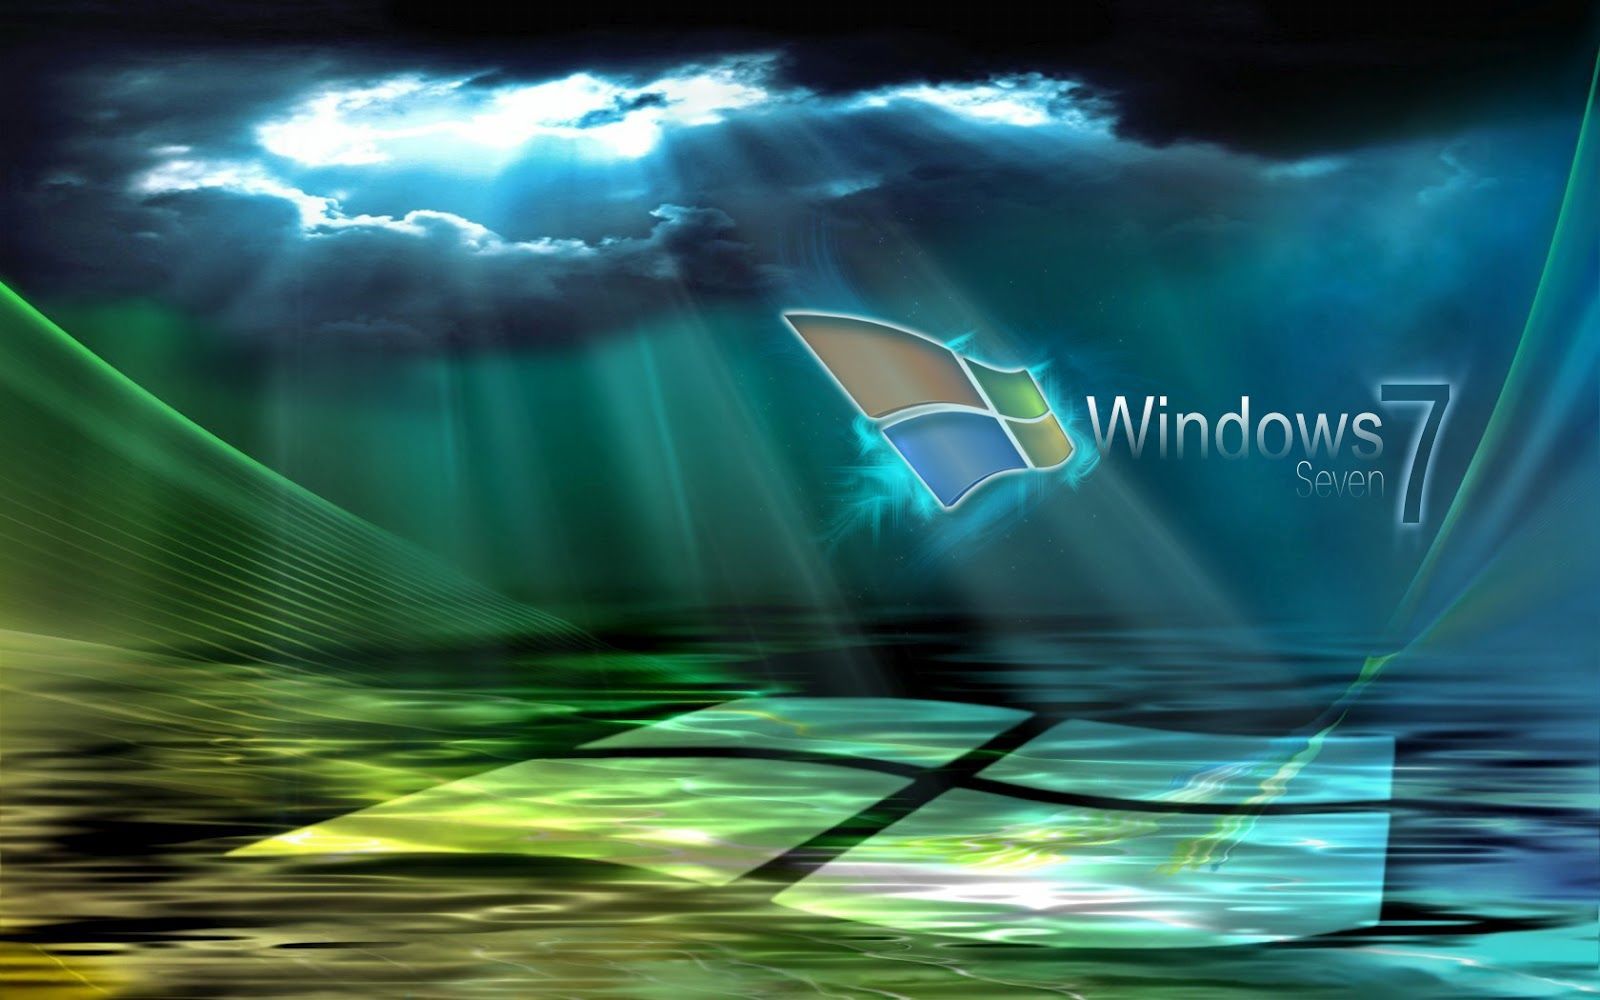 Free Wallpapers For PC Windows 7 - Wallpaper Cave